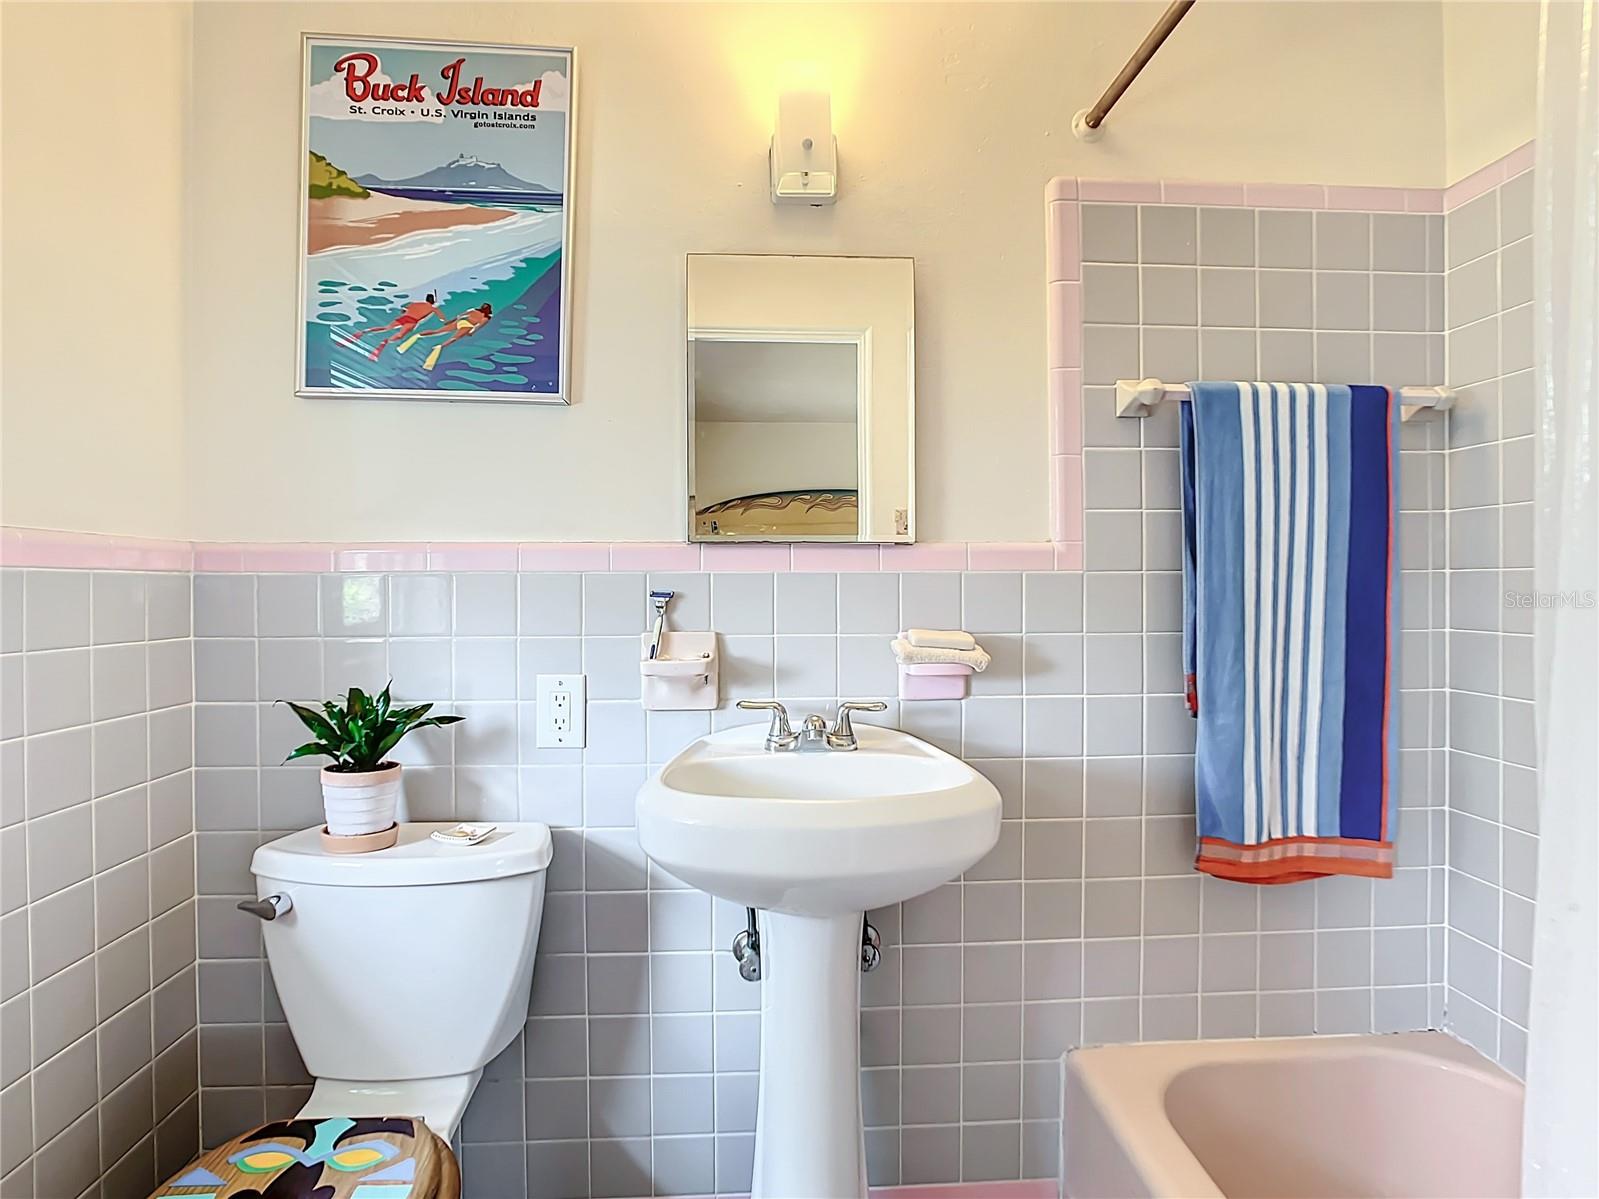 Ah, the retro/vintage lavatory! Includes a full bath tub. Great for a soak after a fun filled day exploring the area.